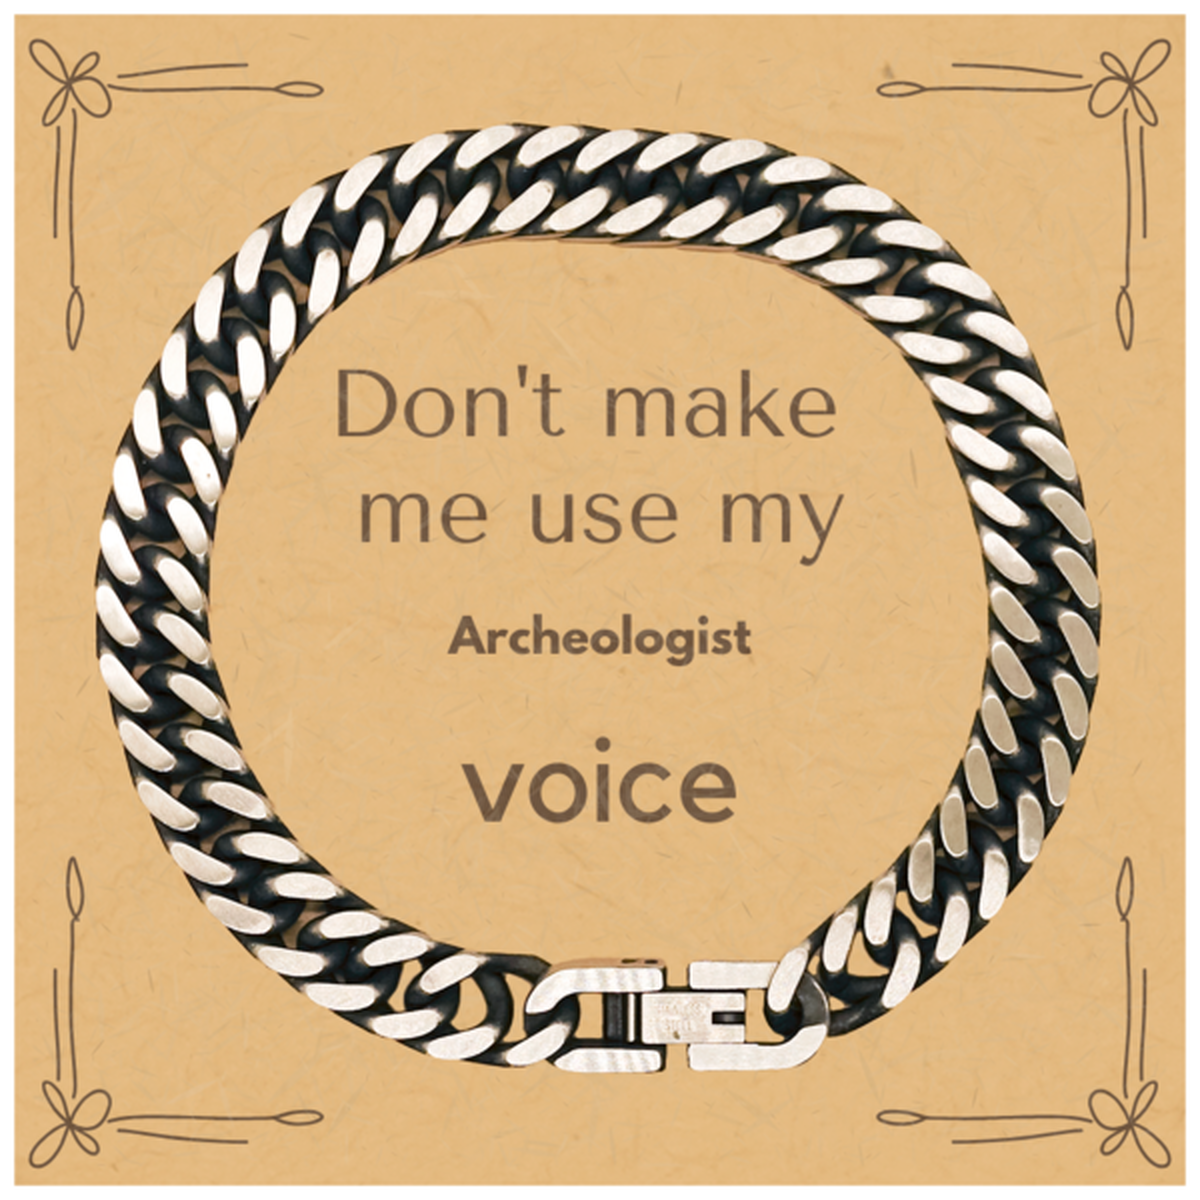 Don't make me use my Archeologist voice, Sarcasm Archeologist Card Gifts, Christmas Archeologist Cuban Link Chain Bracelet Birthday Unique Gifts For Archeologist Coworkers, Men, Women, Colleague, Friends